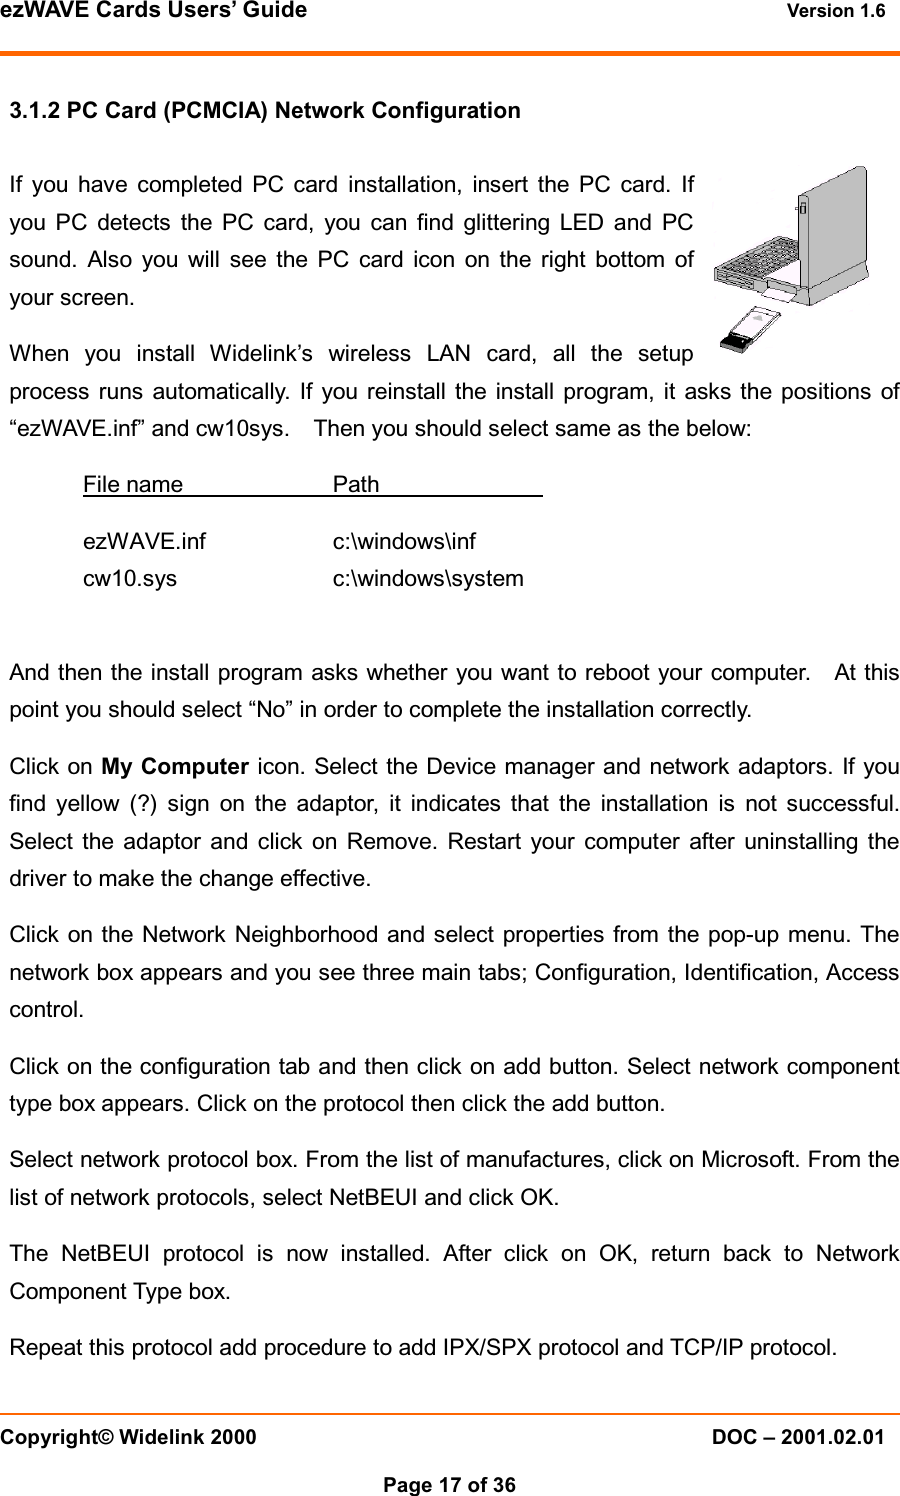 ezWAVE Cards Users’ Guide Version 1.6 Copyright© Widelink 2000 DOC – 2001.02.01Page 17 of 36 3.1.2 PC Card (PCMCIA) Network ConfigurationIf you have completed PC card installation, insert the PC card. Ifyou PC detects the PC card, you can find glittering LED and PCsound. Also you will see the PC card icon on the right bottom ofyour screen.When you install Widelink’s wireless LAN card, all the setupprocess runs automatically. If you reinstall the install program, it asks the positions of“ezWAVE.inf” and cw10sys. Then you should select same as the below:File name PathezWAVE.inf c:\windows\infcw10.sys c:\windows\systemAnd then the install program asks whether you want to reboot your computer. At thispoint you should select “No” in order to complete the installation correctly.Click on My Computer icon. Select the Device manager and network adaptors. If youfind yellow (?) sign on the adaptor, it indicates that the installation is not successful.Select the adaptor and click on Remove. Restart your computer after uninstalling thedriver to make the change effective.Click on the Network Neighborhood and select properties from the pop-up menu. Thenetwork box appears and you see three main tabs; Configuration, Identification, Accesscontrol.Click on the configuration tab and then click on add button. Select network componenttype box appears. Click on the protocol then click the add button.Select network protocol box. From the list of manufactures, click on Microsoft. From thelist of network protocols, select NetBEUI and click OK.The NetBEUI protocol is now installed. After click on OK, return back to NetworkComponent Type box.Repeat this protocol add procedure to add IPX/SPX protocol and TCP/IP protocol.